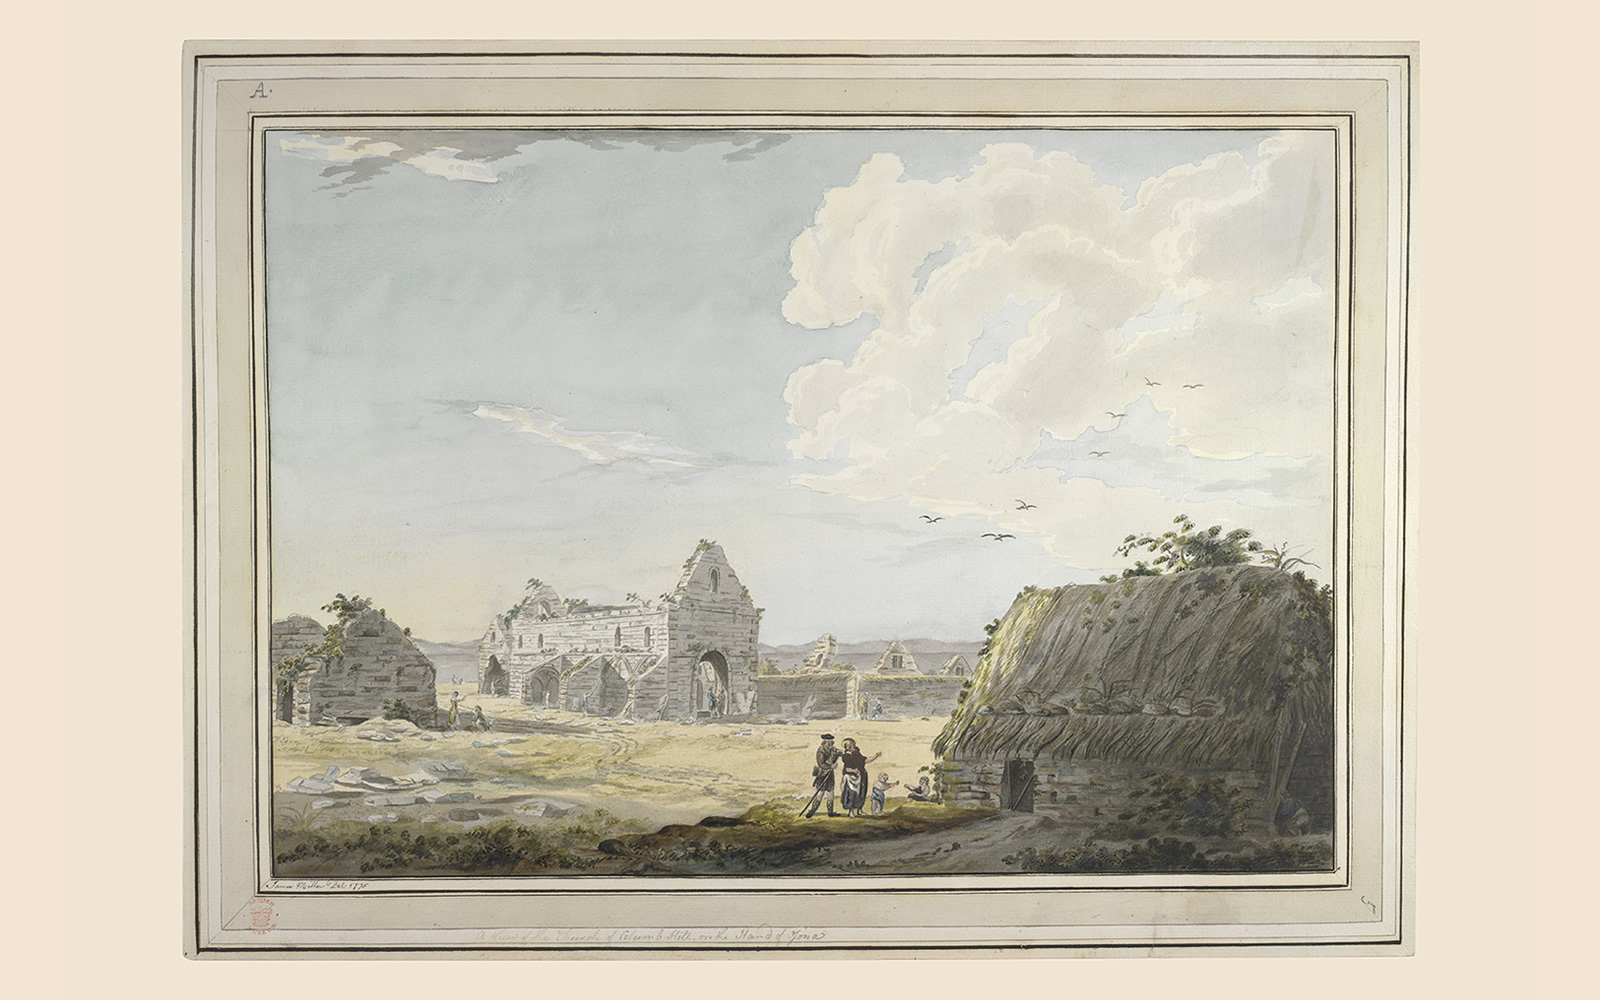 James Miller, 'A View of the Church of Columb Kill, on the Island of Iona' (British Library)